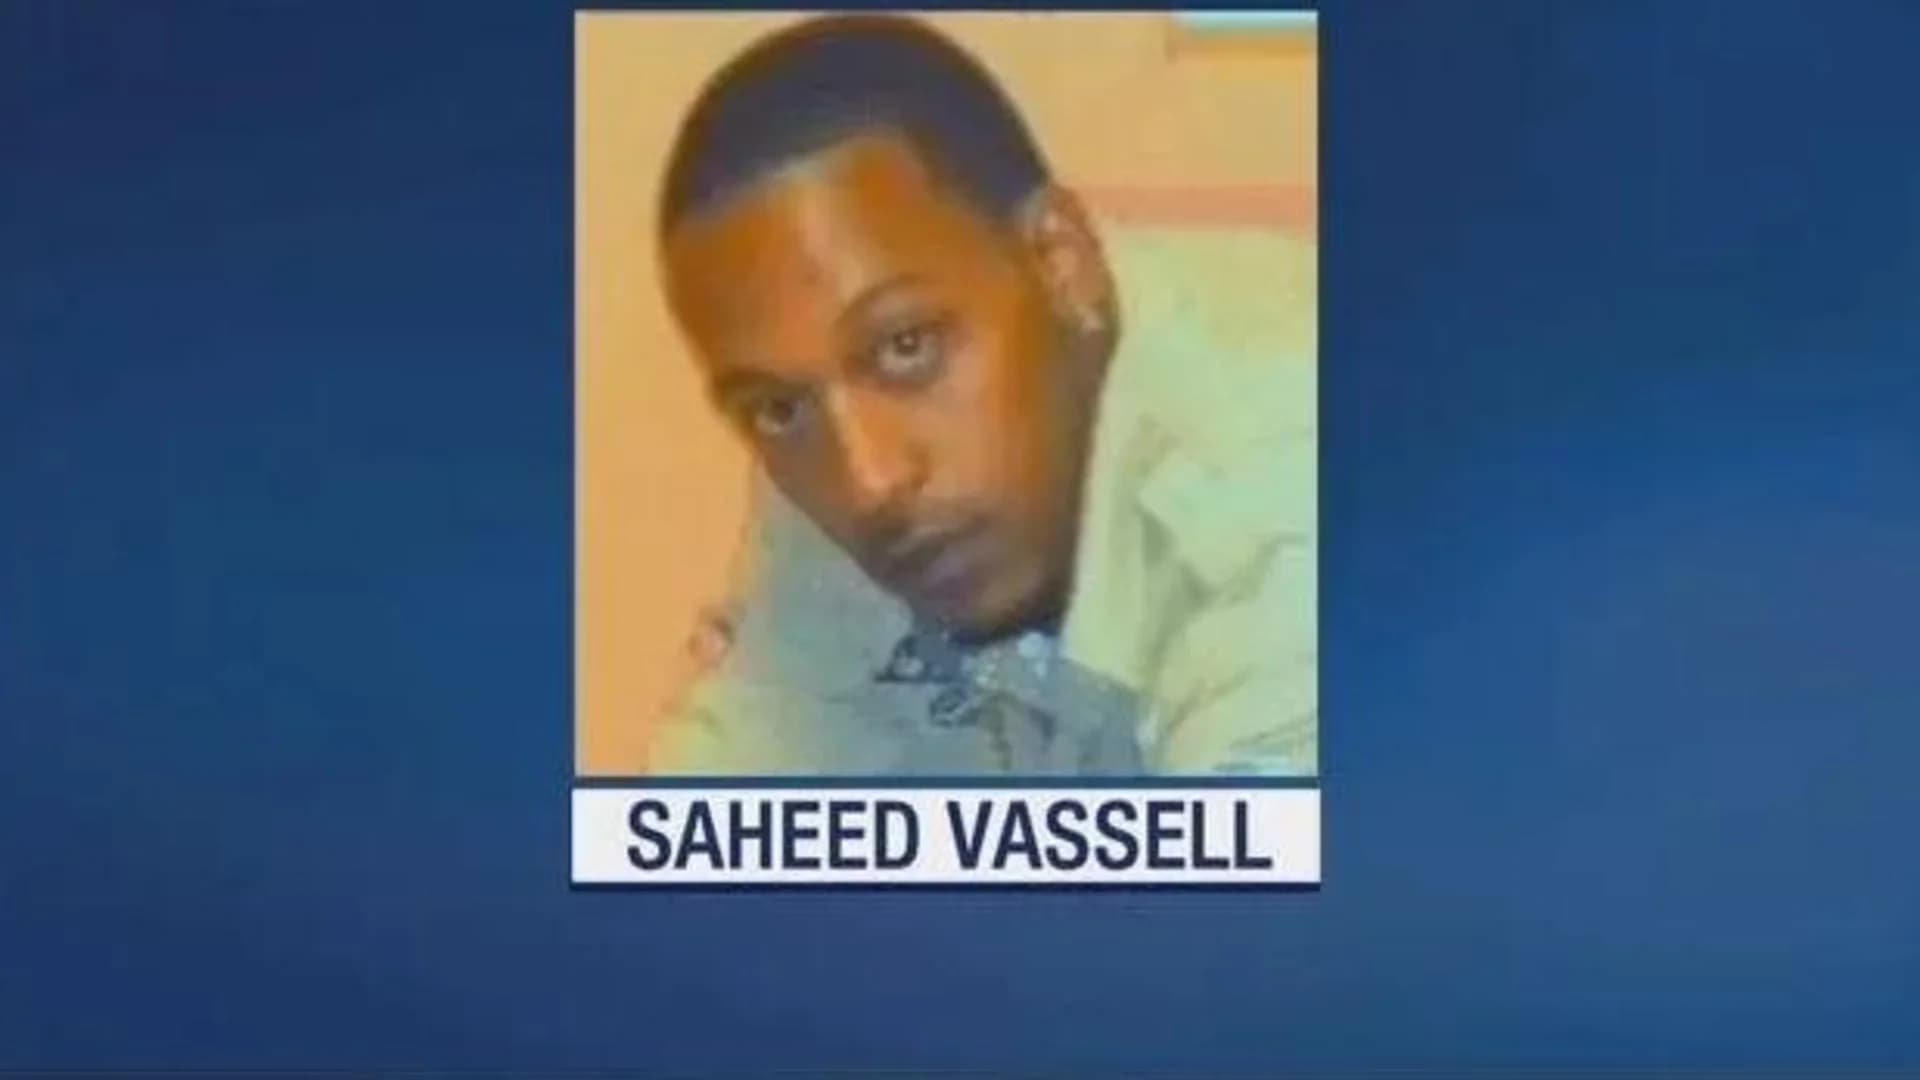 Funeral service held for man fatally shot by police